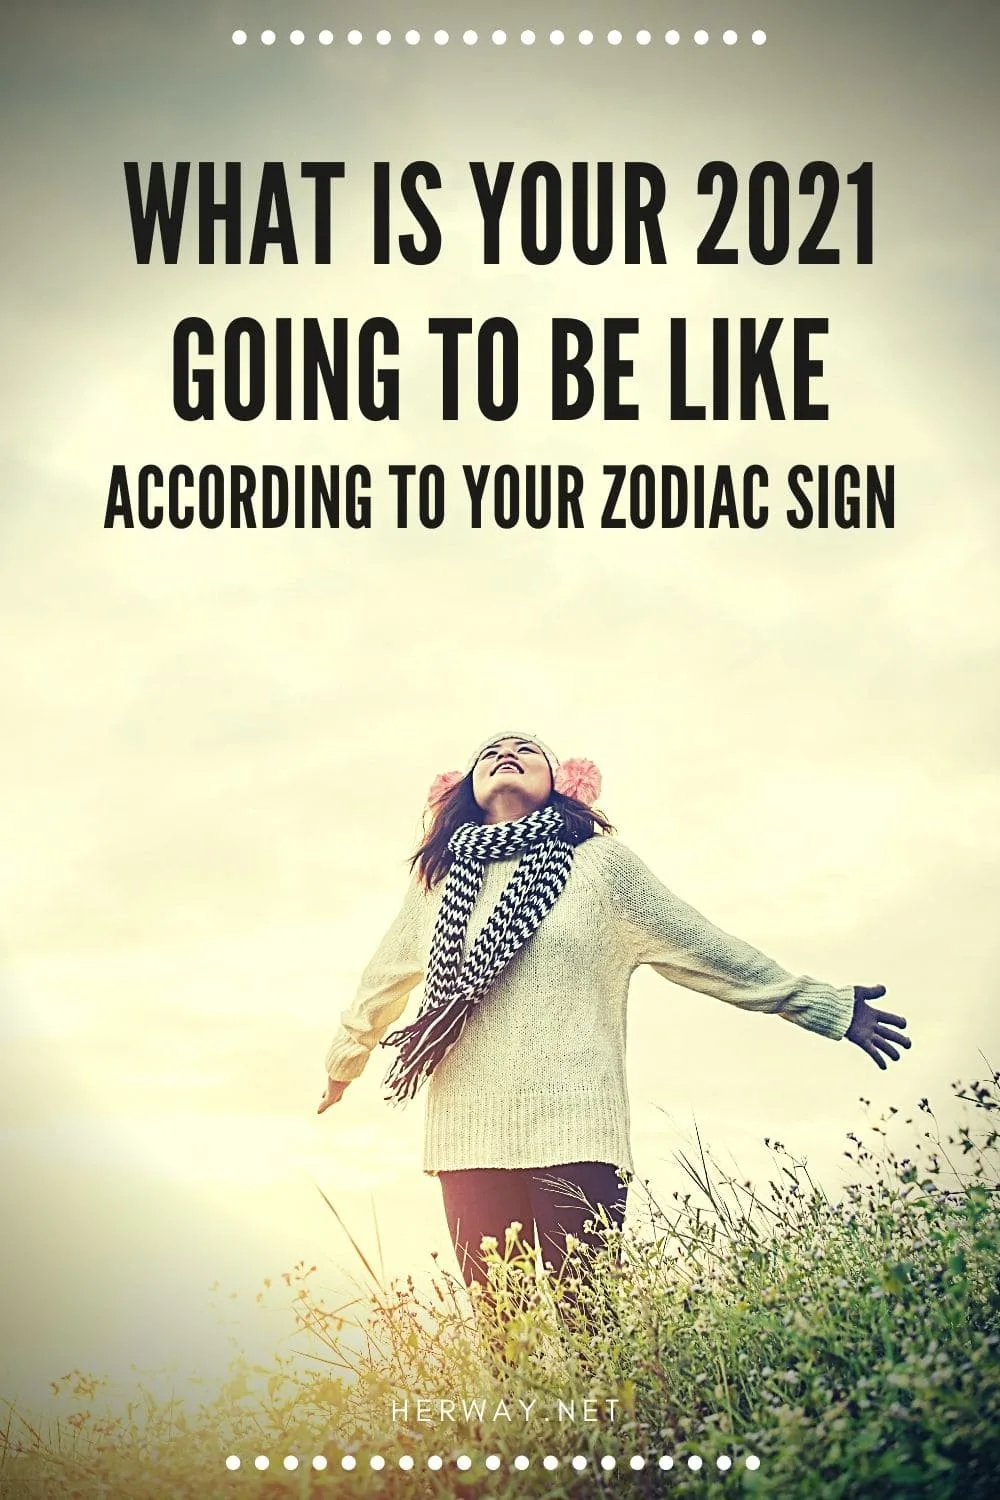 What Is Your 2021 Going To Be Like According To Your Zodiac Sign